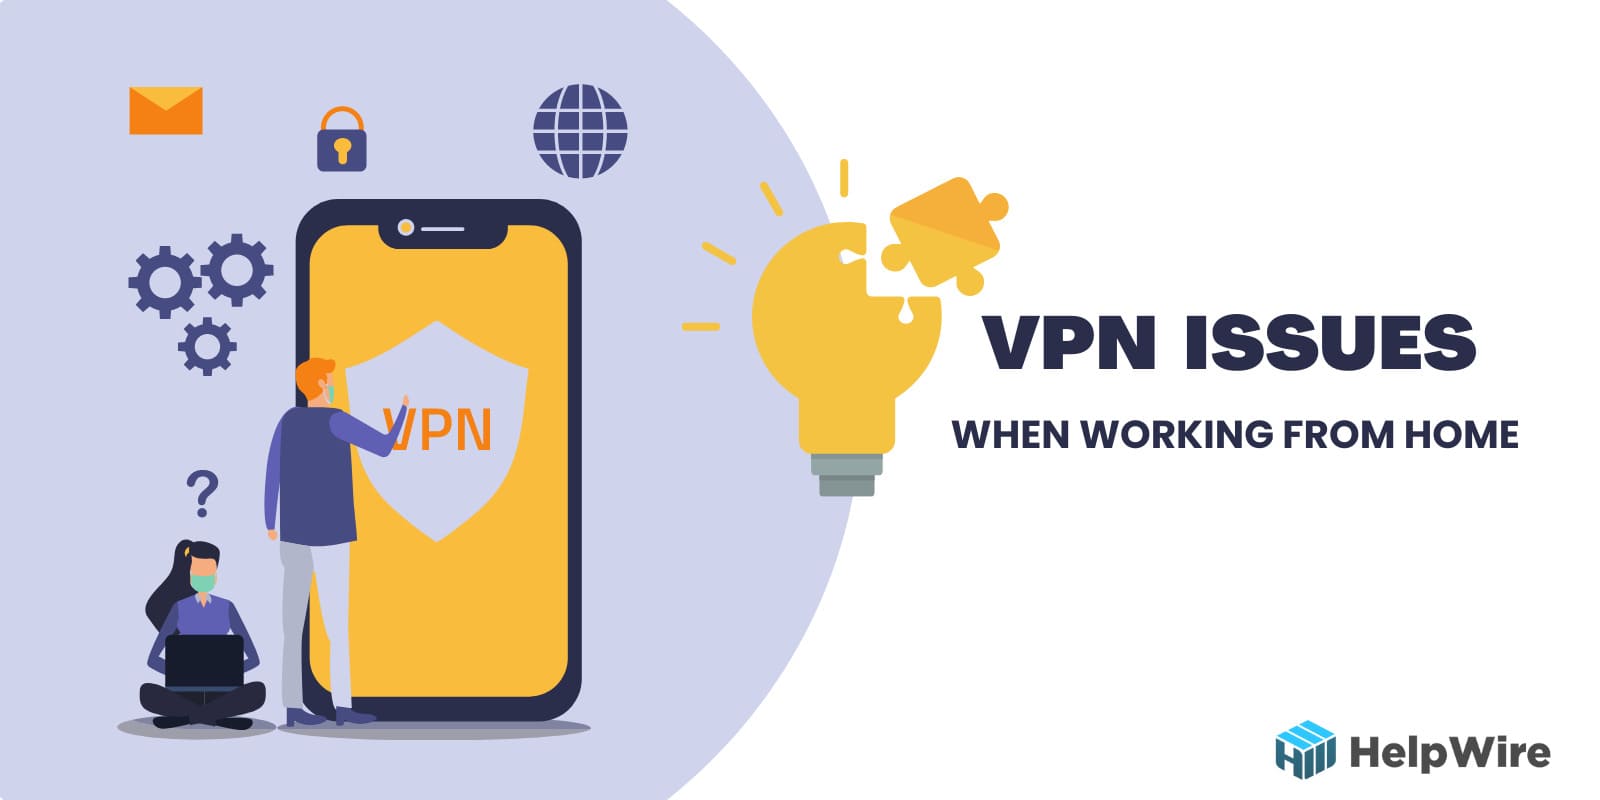 VPN issues when working from home